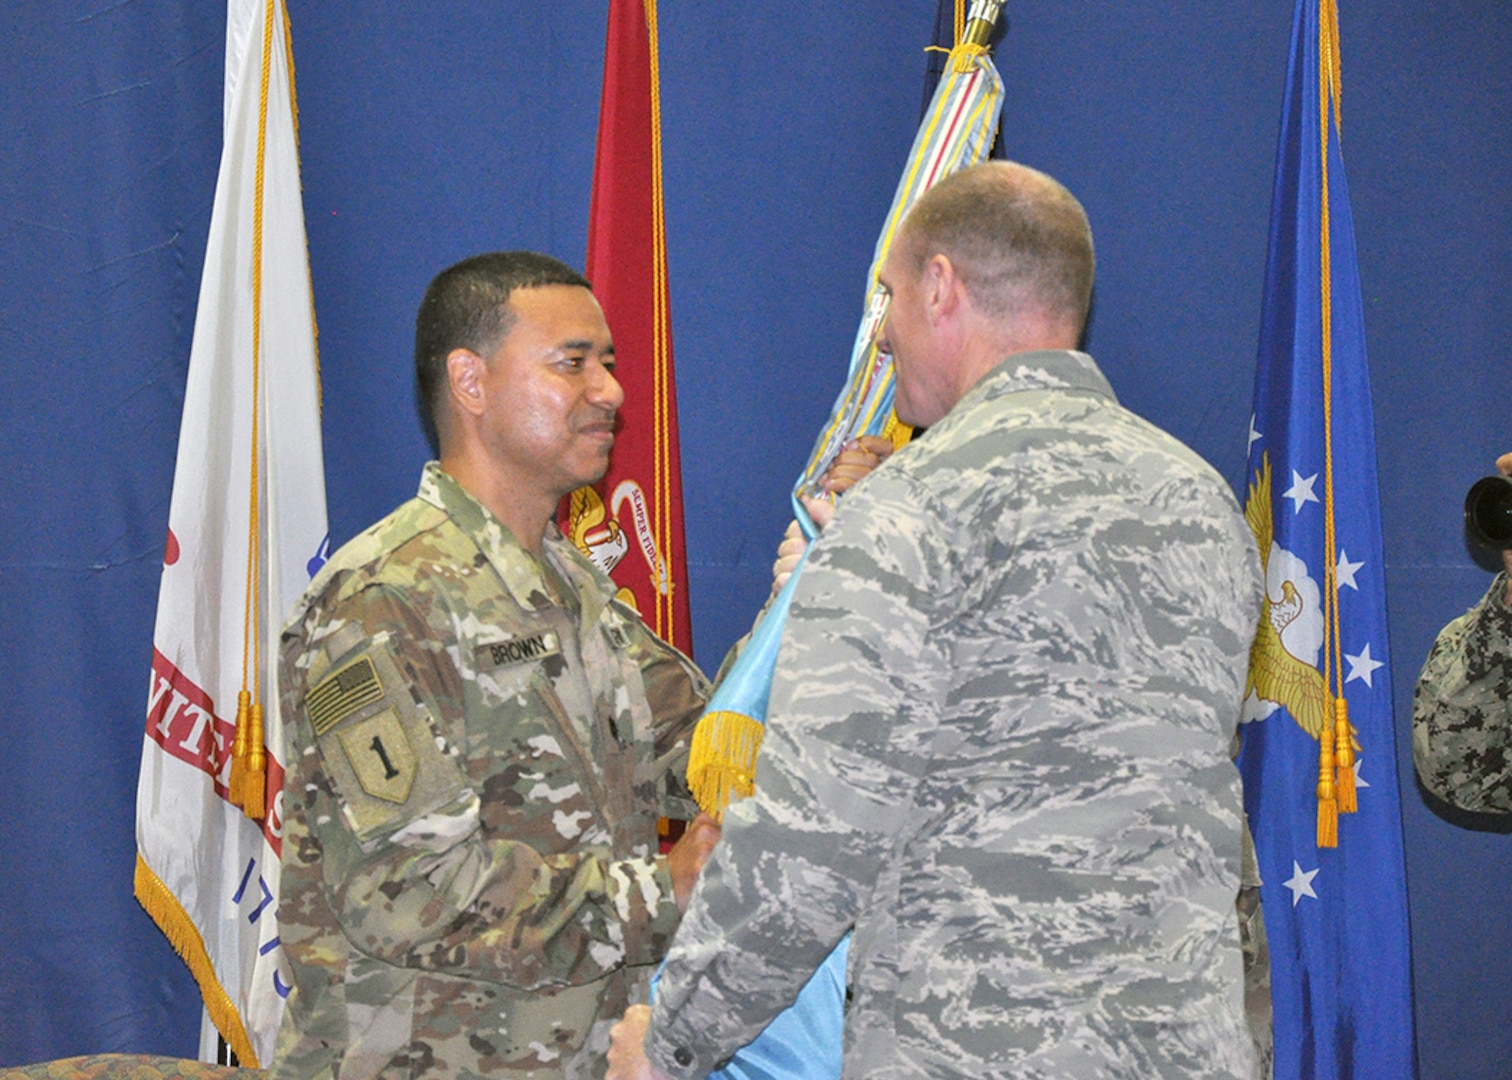 DLA Energy Commander Air Force Brig. Gen. Martin Chapin passes the DLA flag to the new DLA Energy Middle East Commander Army Lt. Col. Henry Brown, during a change of command ceremony at Naval Support Activity Bahrain June 27.  